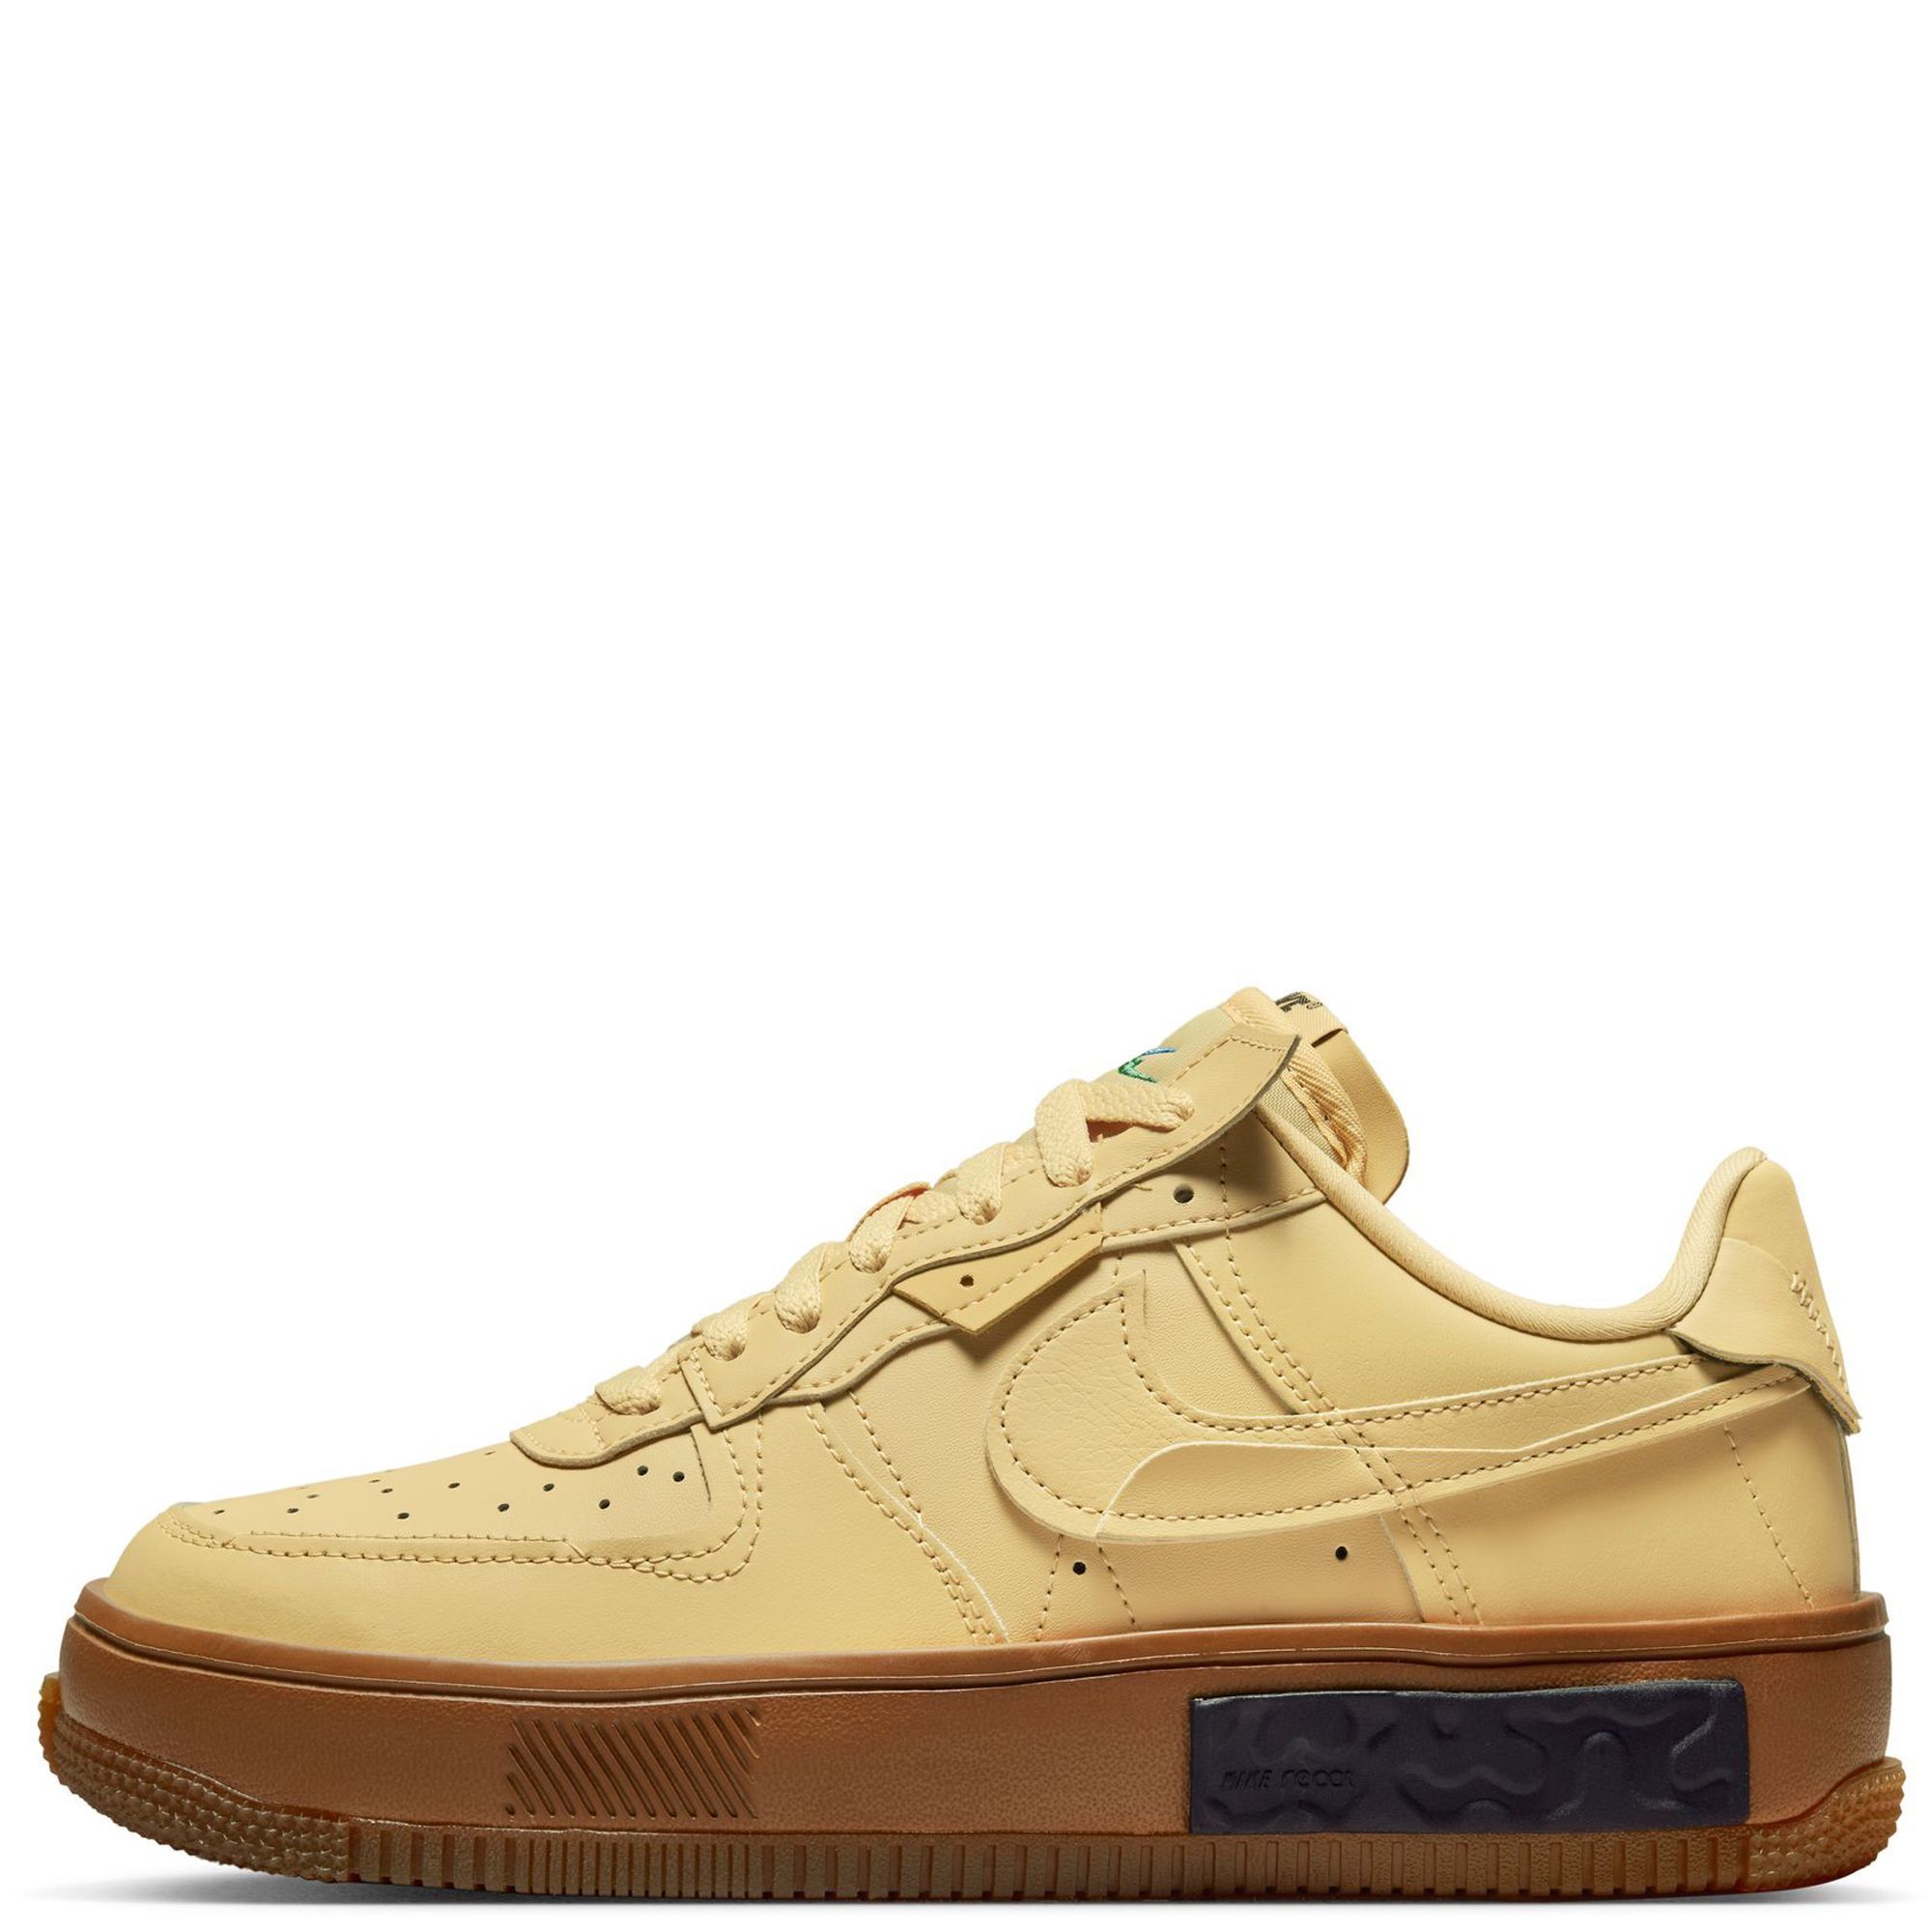 Nike Air Force 1 shadow outfit  Cute summer outfits, Outfits with  leggings, Cute outfits